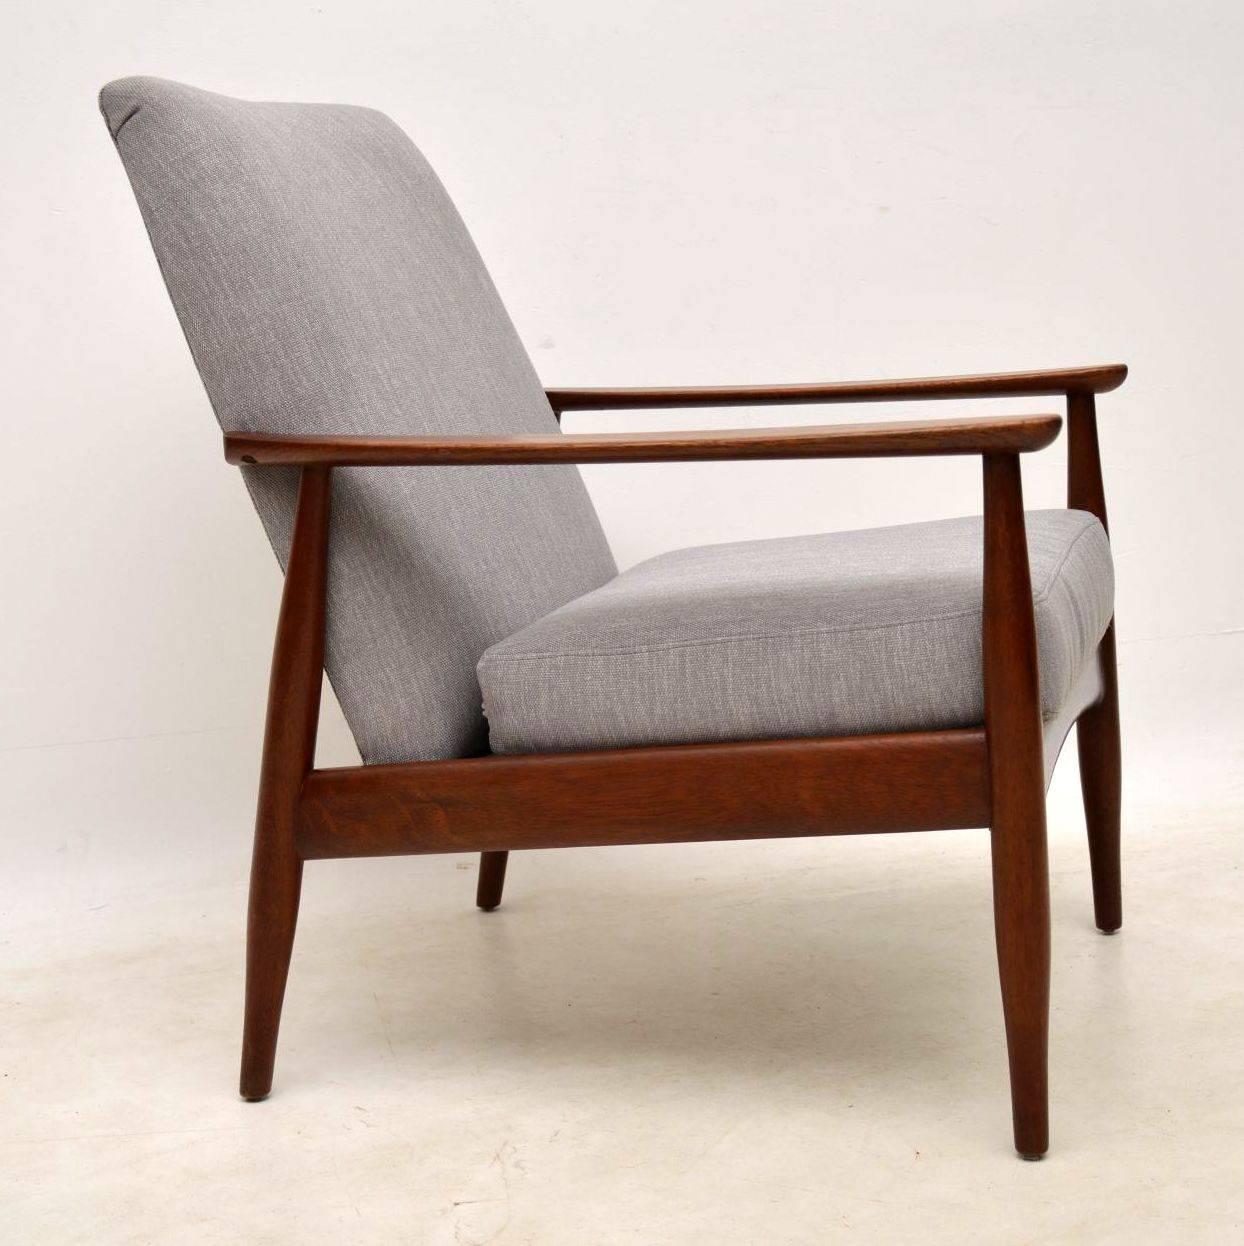 A stylish and comfortable Danish vintage armchair, this dates from the 1960s. The frame is solid Afromosia wood, we have had this newly upholstered in a lovely light grey fabric. The frame is clean, sturdy and sound, with only some very minor wear